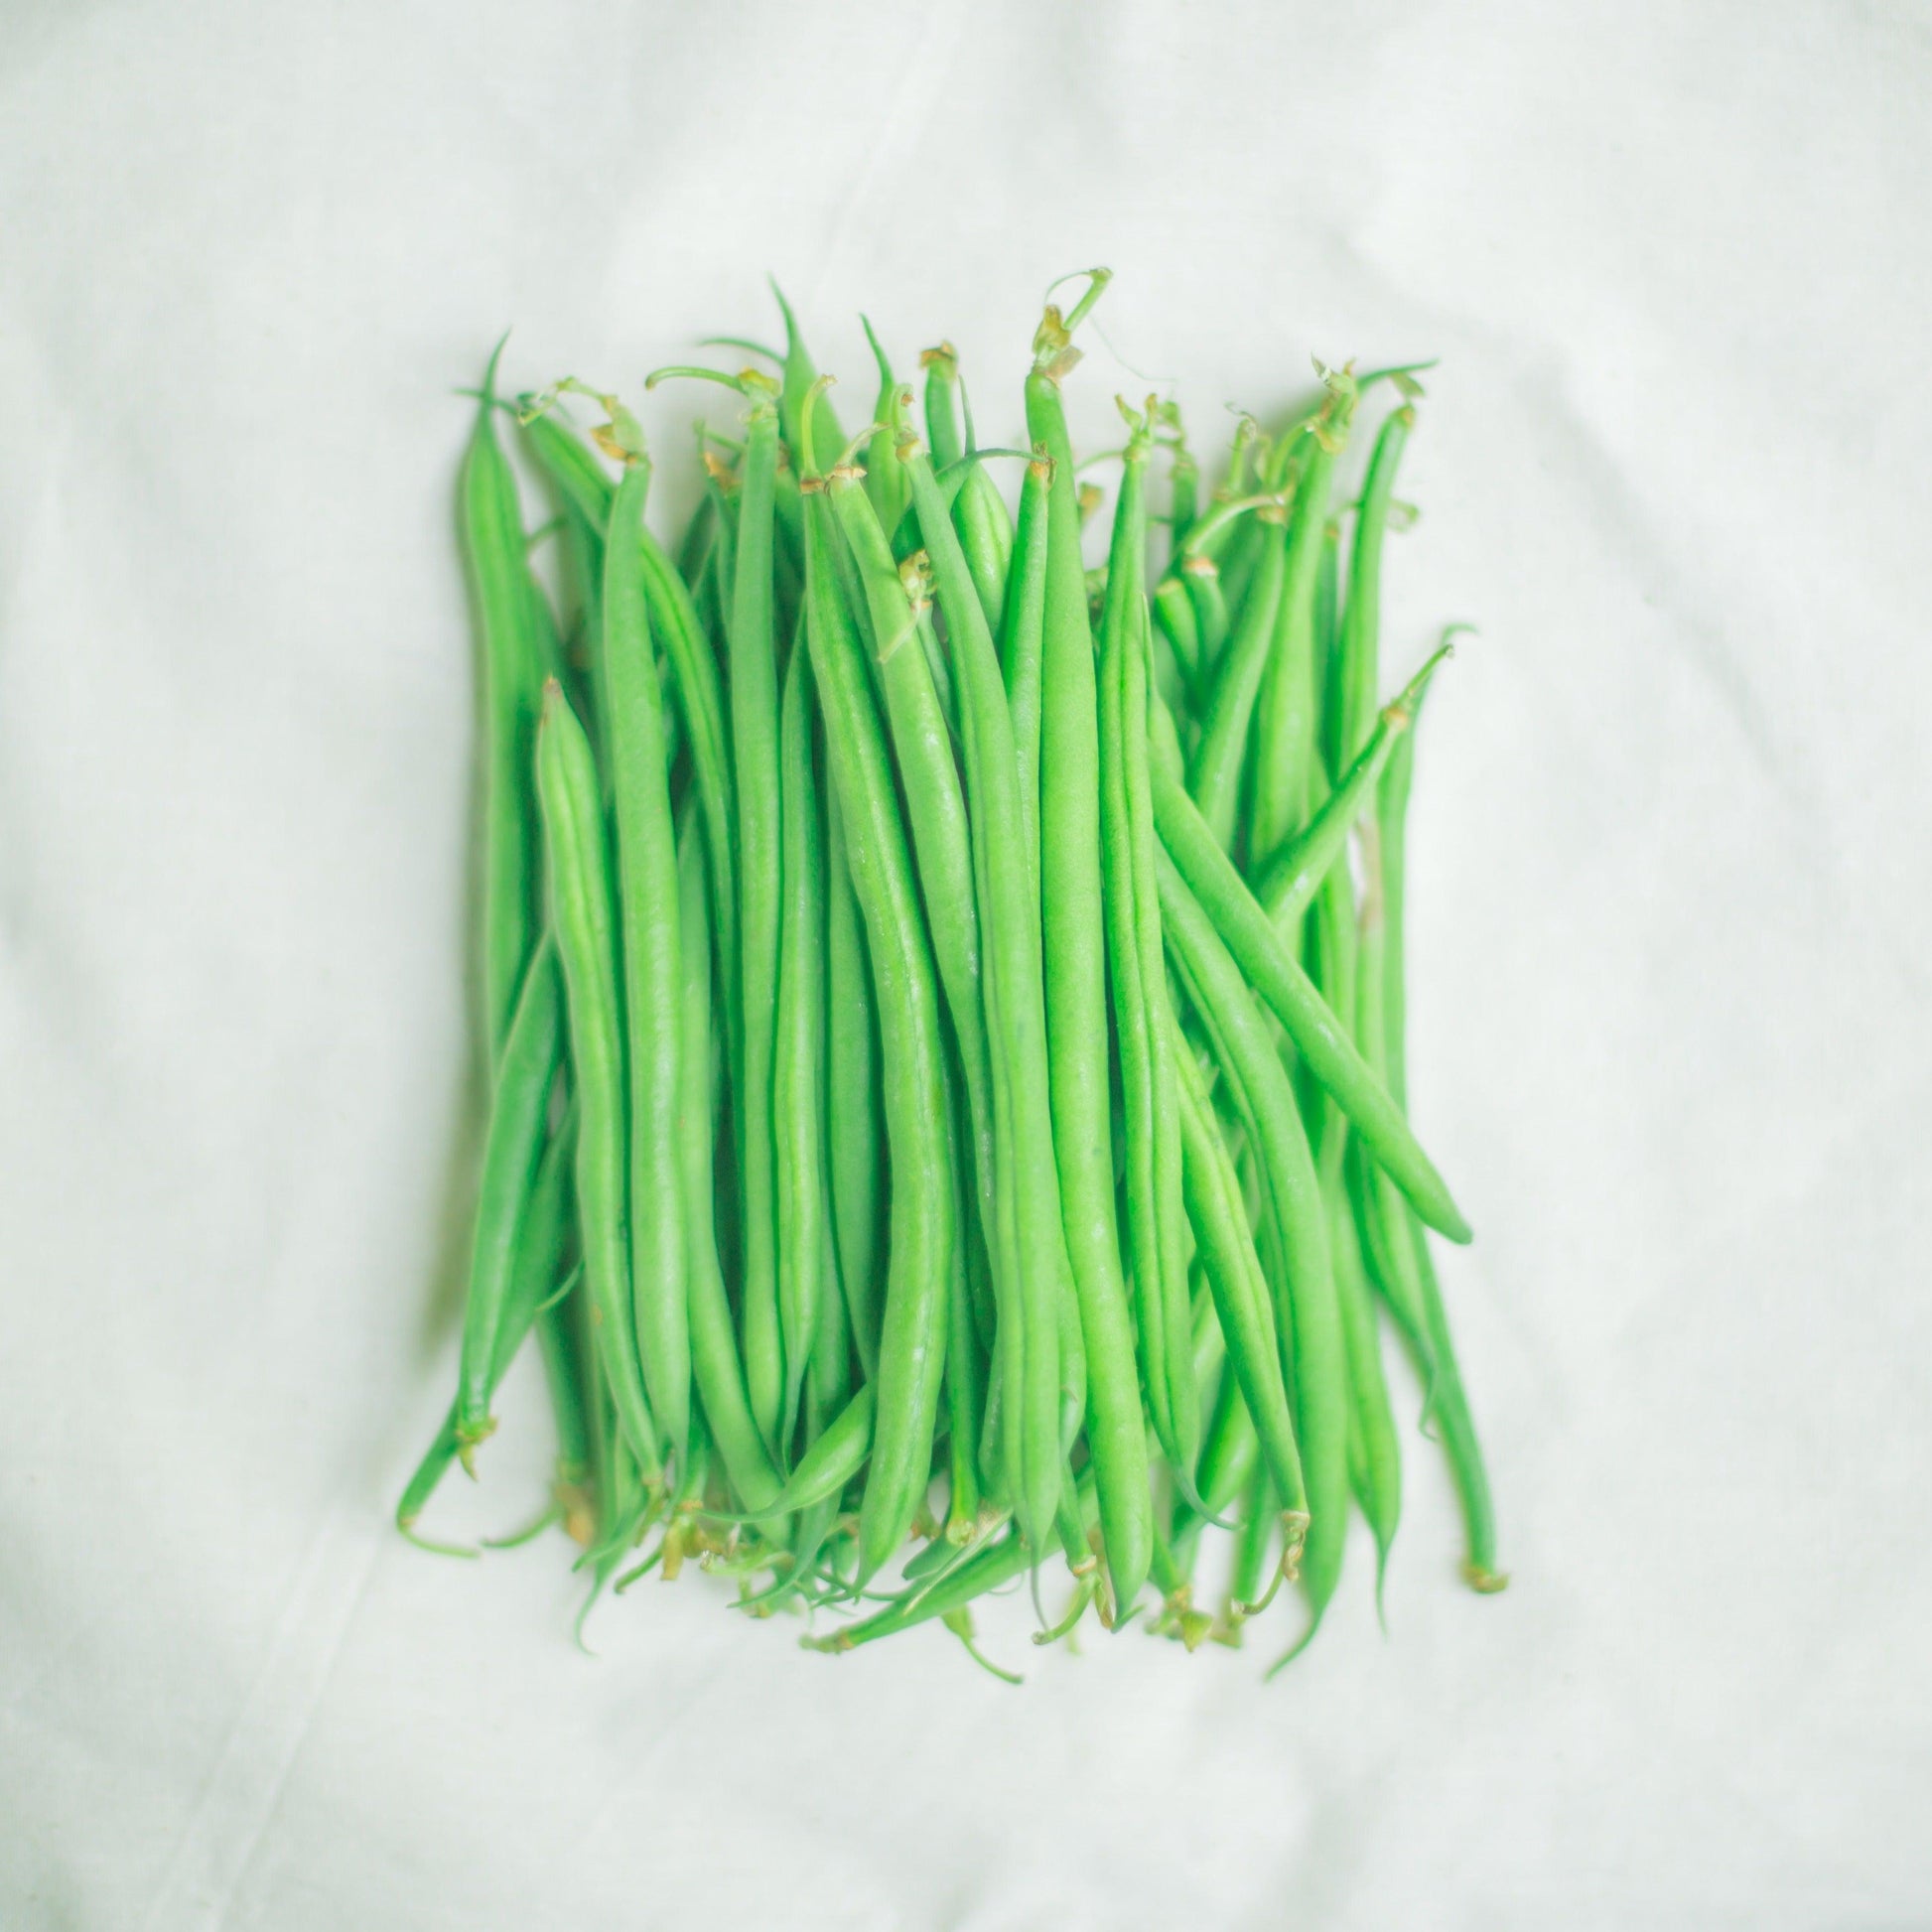 French Beans - Good Food Community